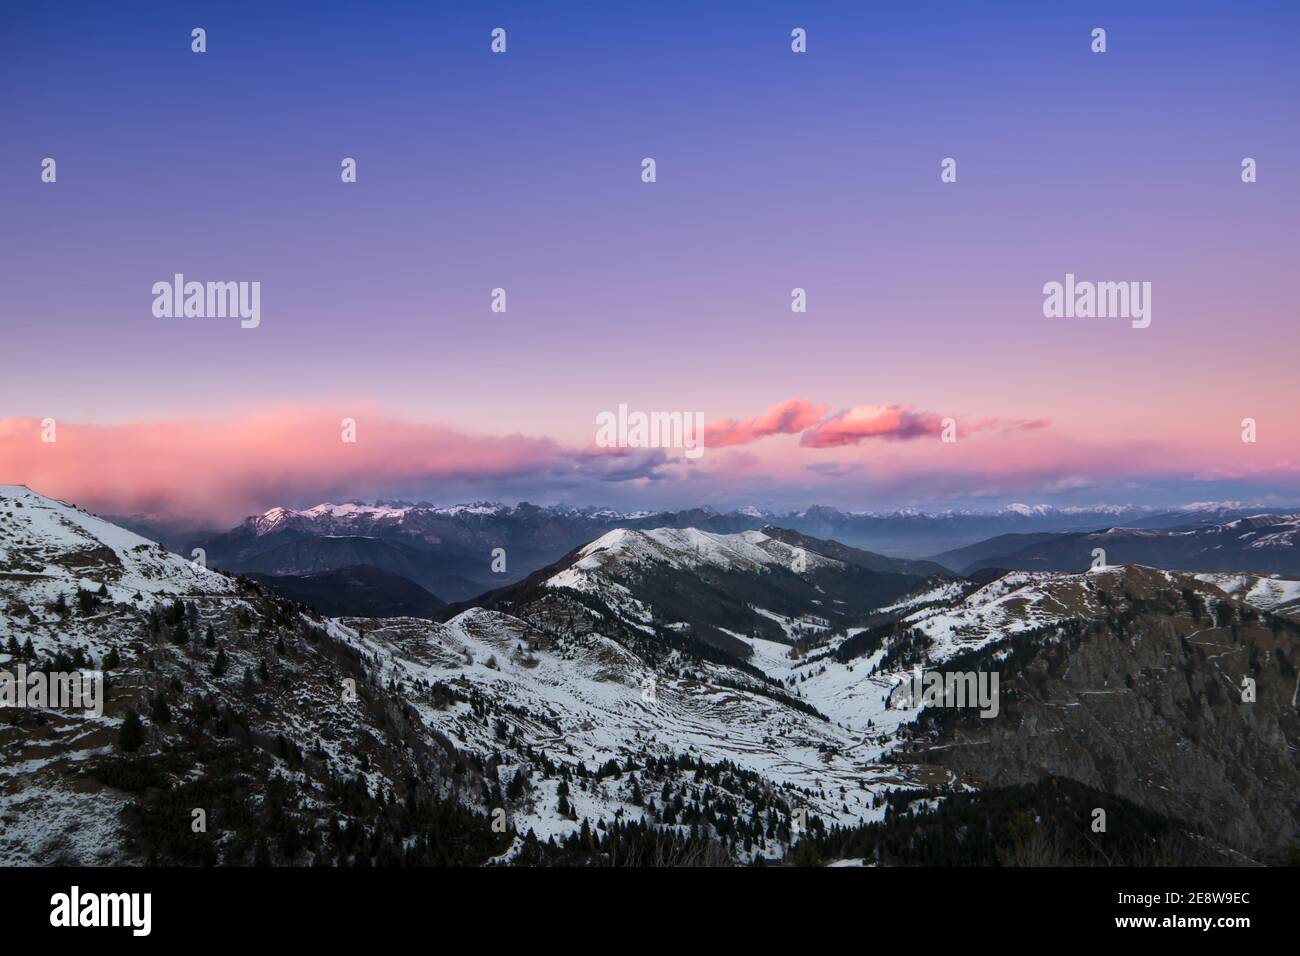 Scenic snowy mountain valley in the purple sky backgr Stock Photo